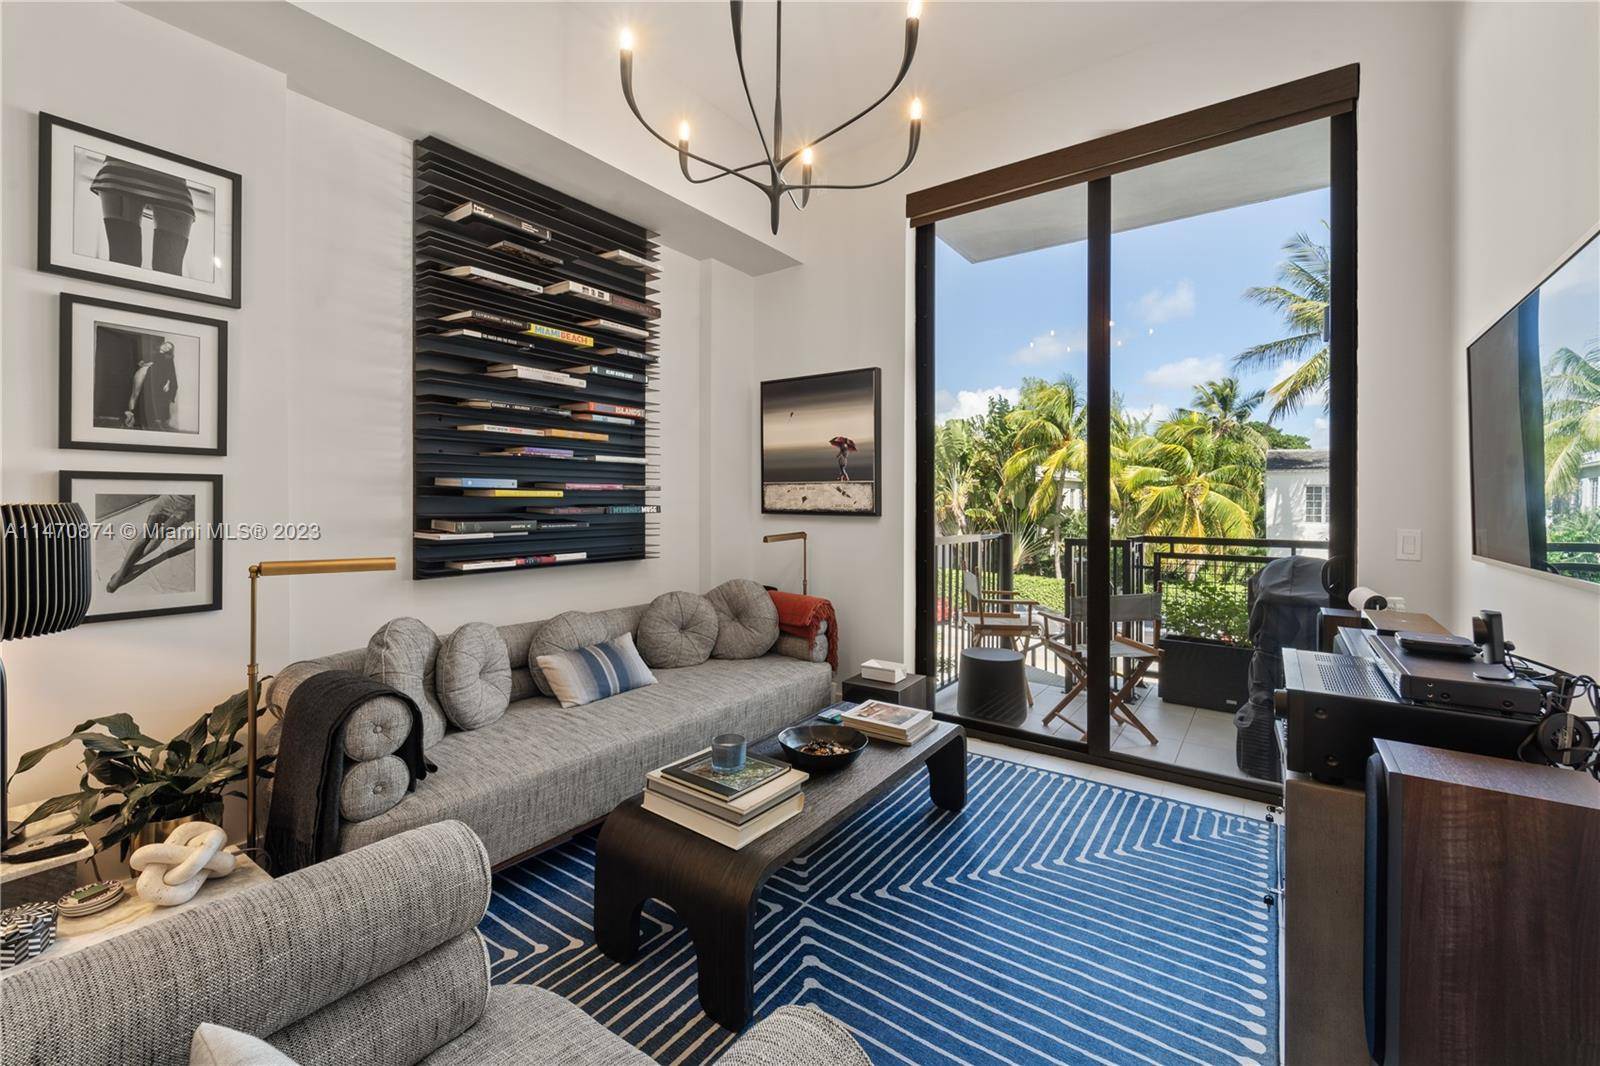 Welcome to this stunning, sun filled one bedroom one and half bath condo located in the heart of South Beach Miami.